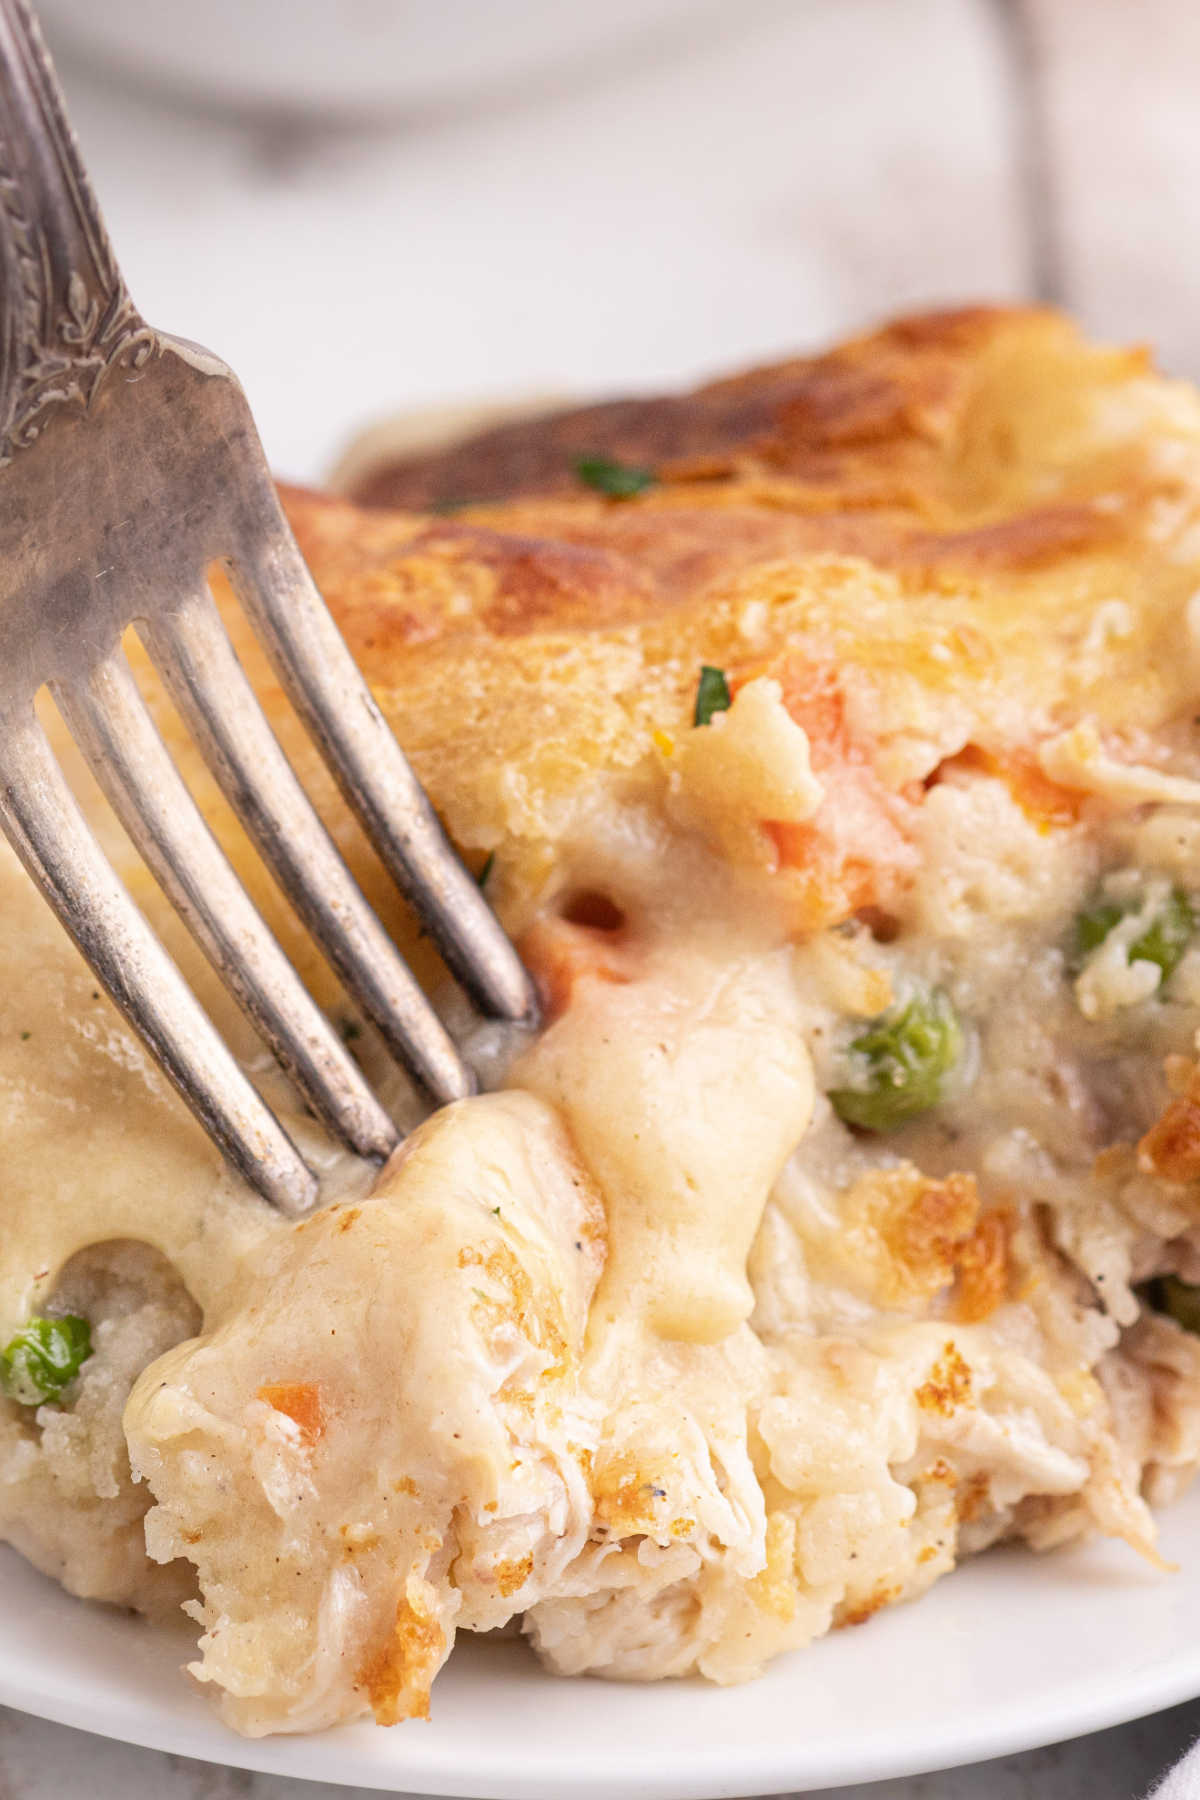 Close up portrait image of a chicken cobbler recipe with a fork digging into it.